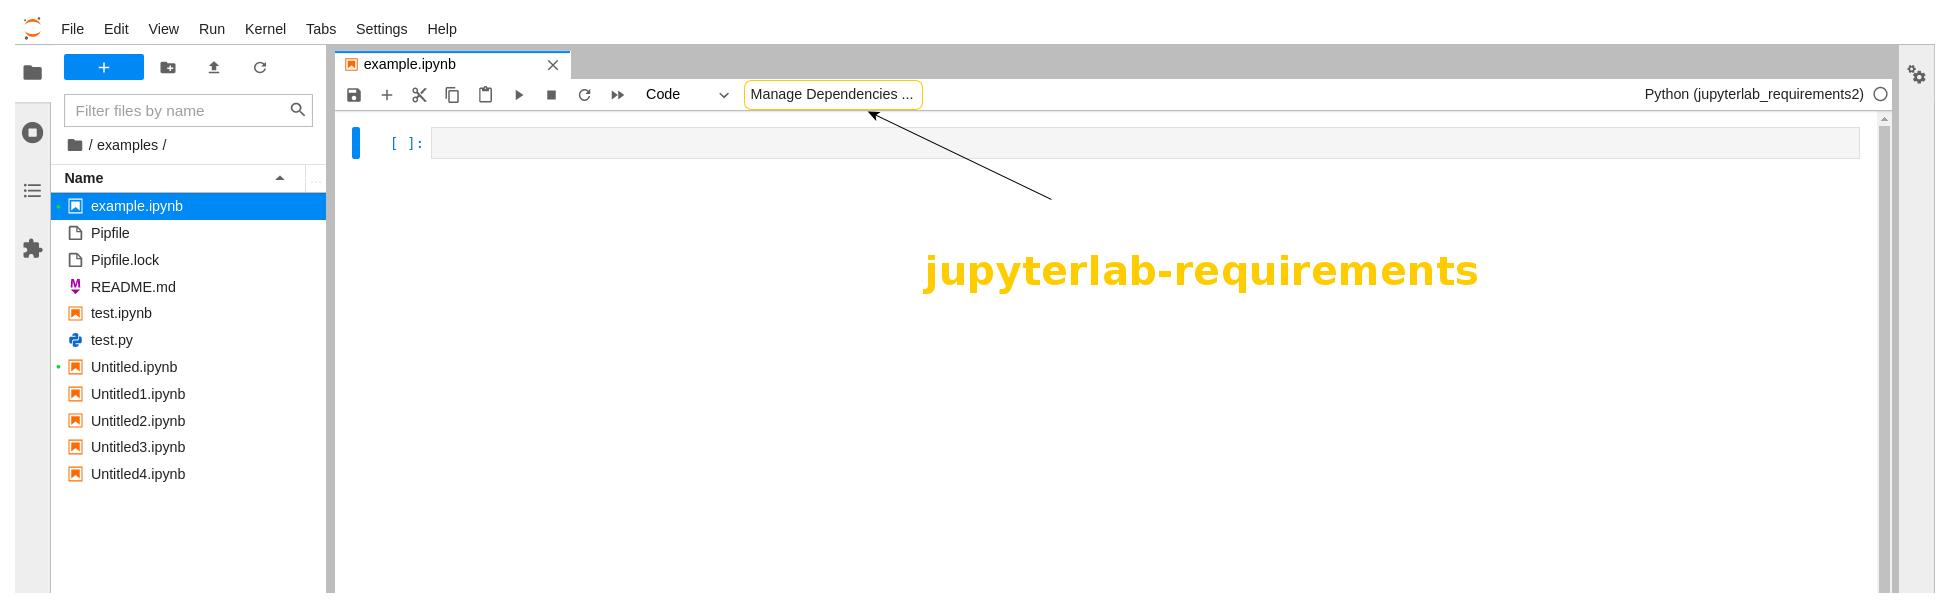 JupyterLab Requirements Extension